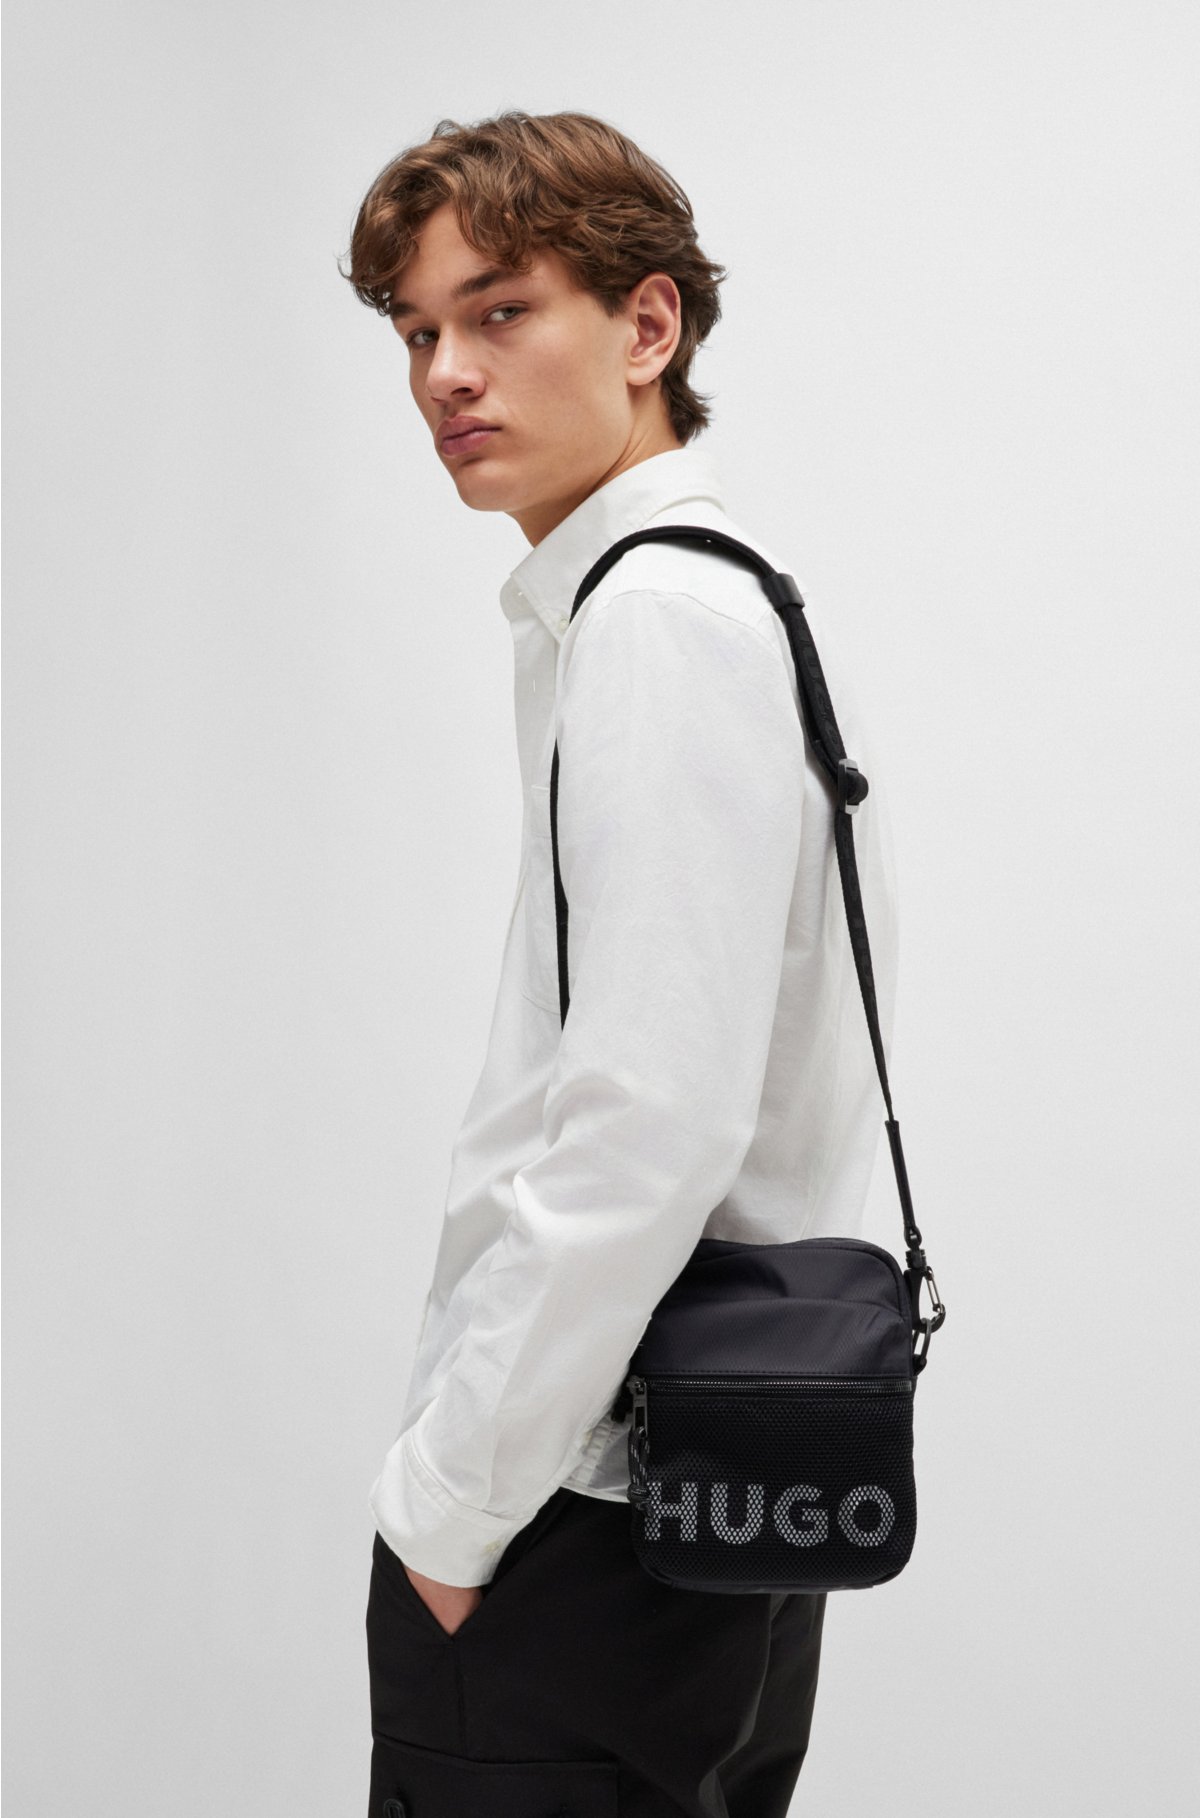 Reporter bag with contrast logo and mesh overlay, Black